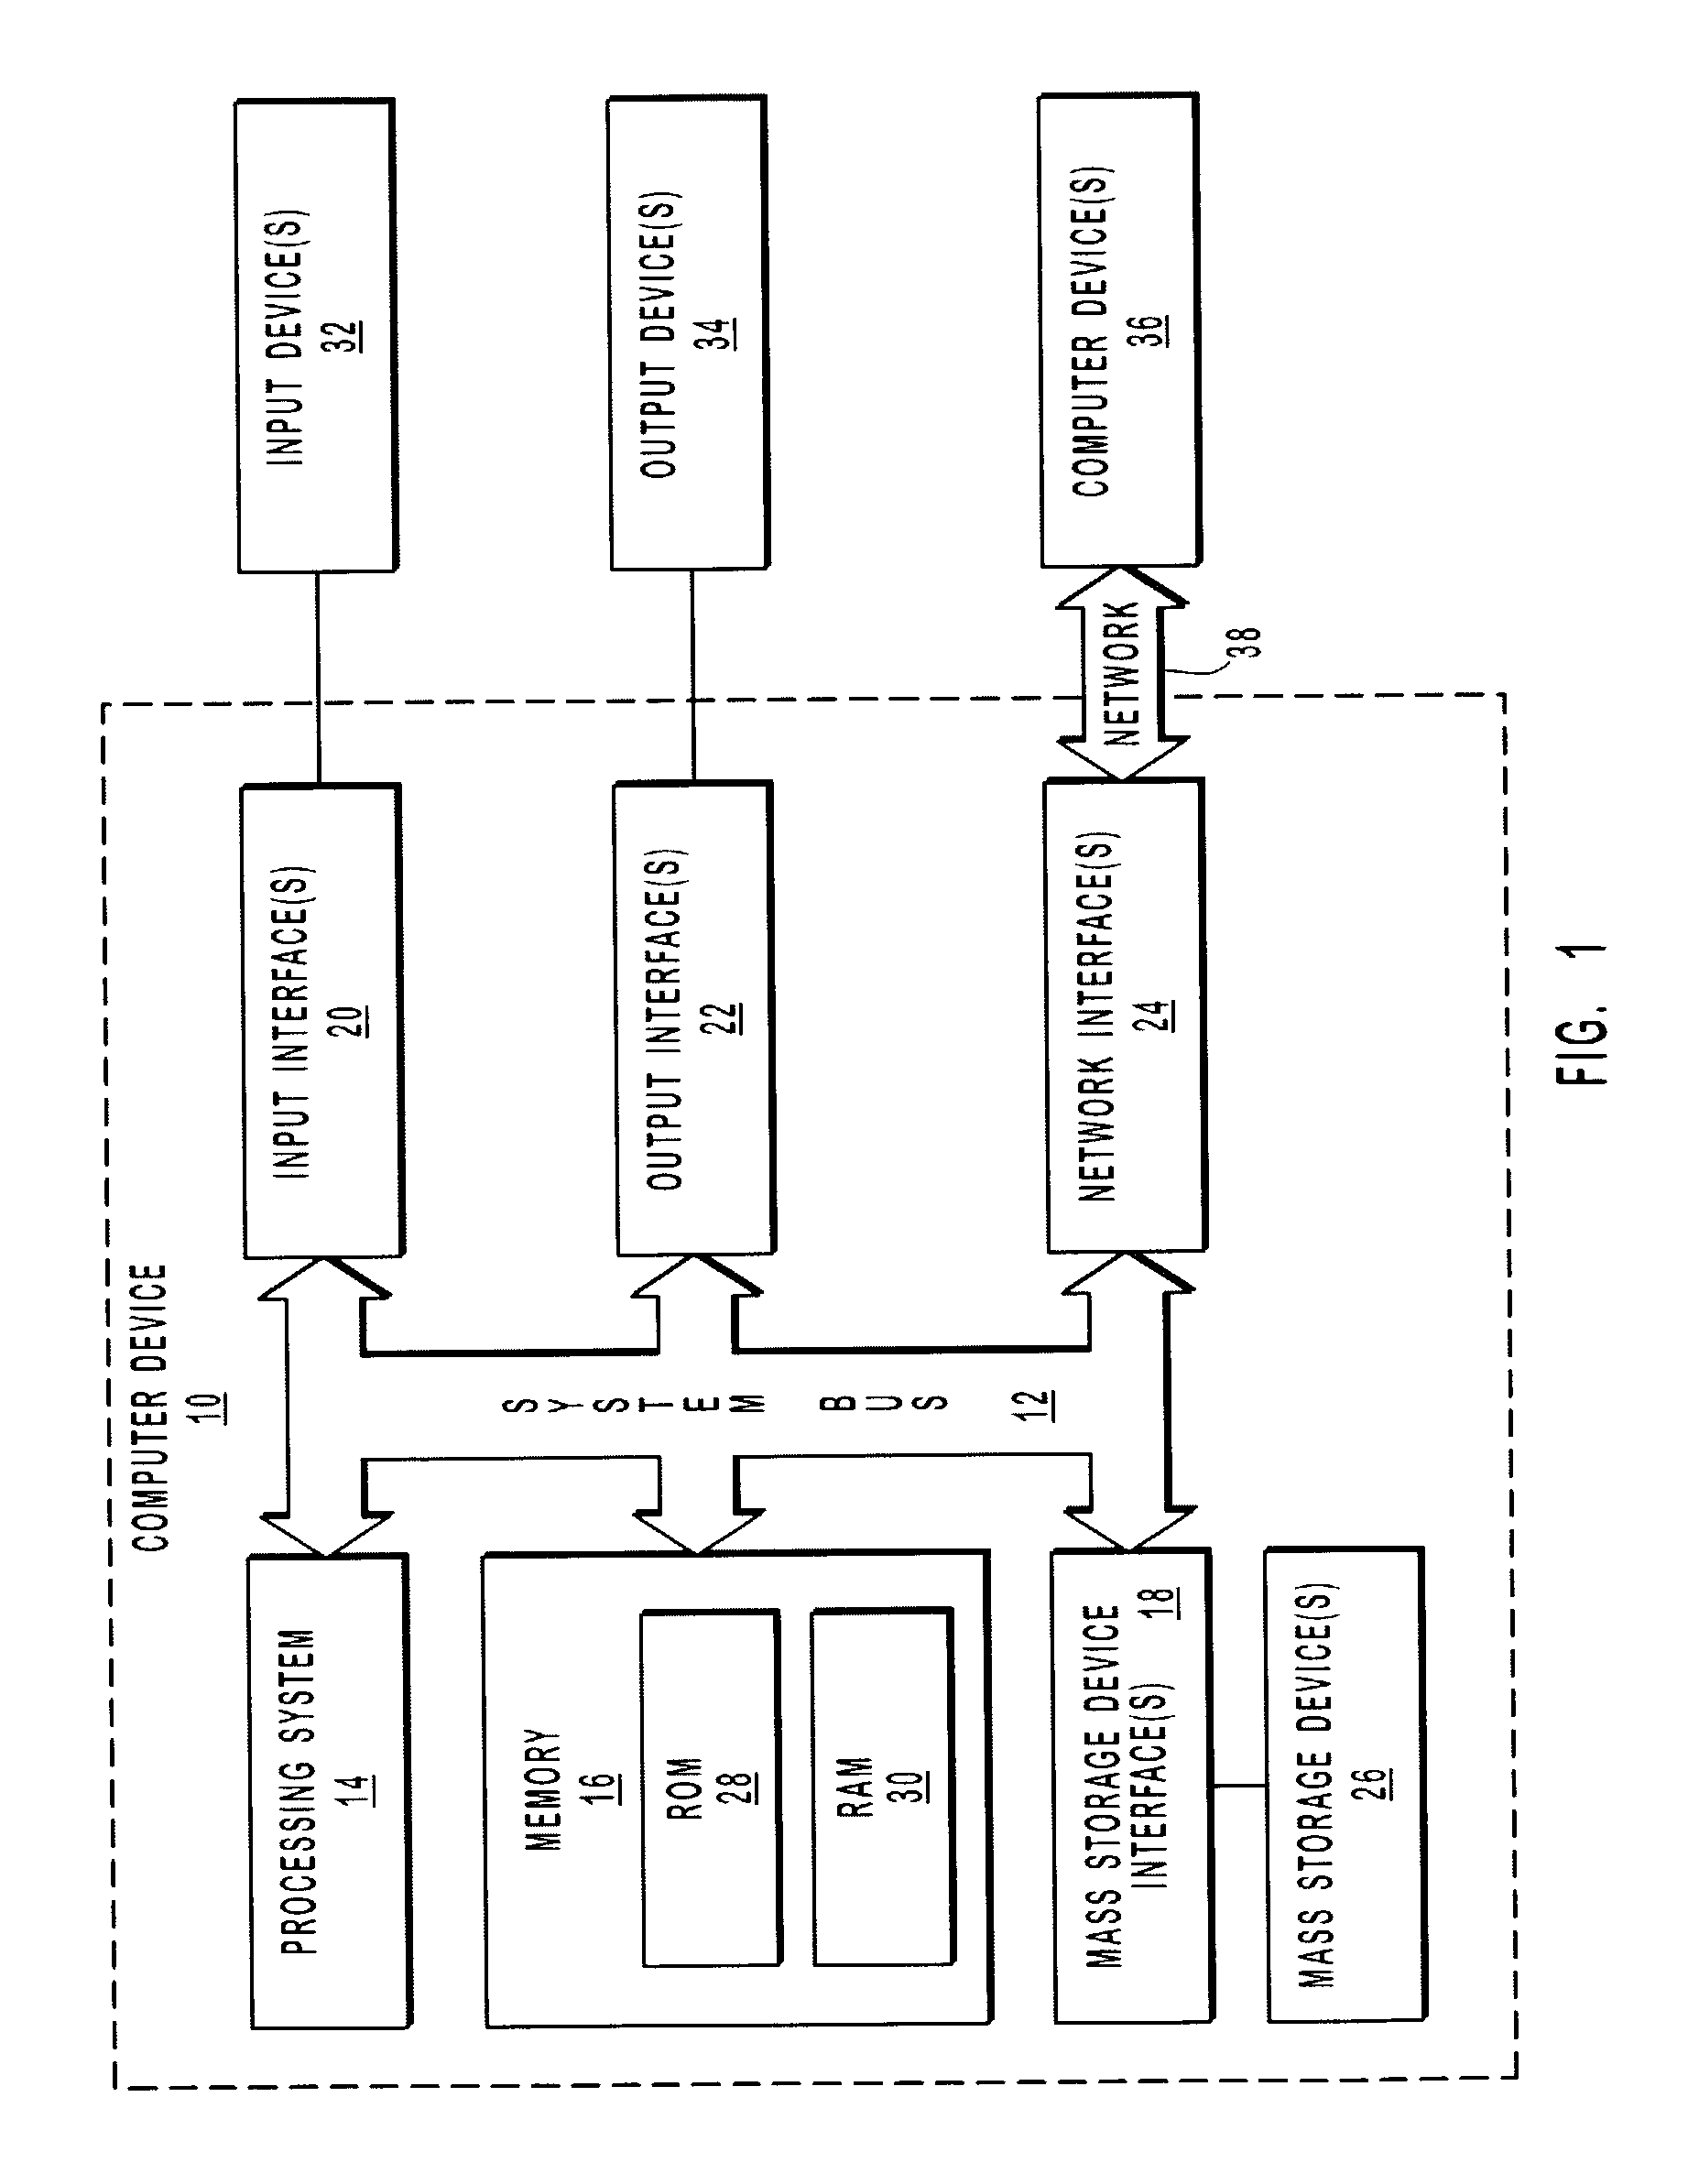 Systems and methods for downscaling an image